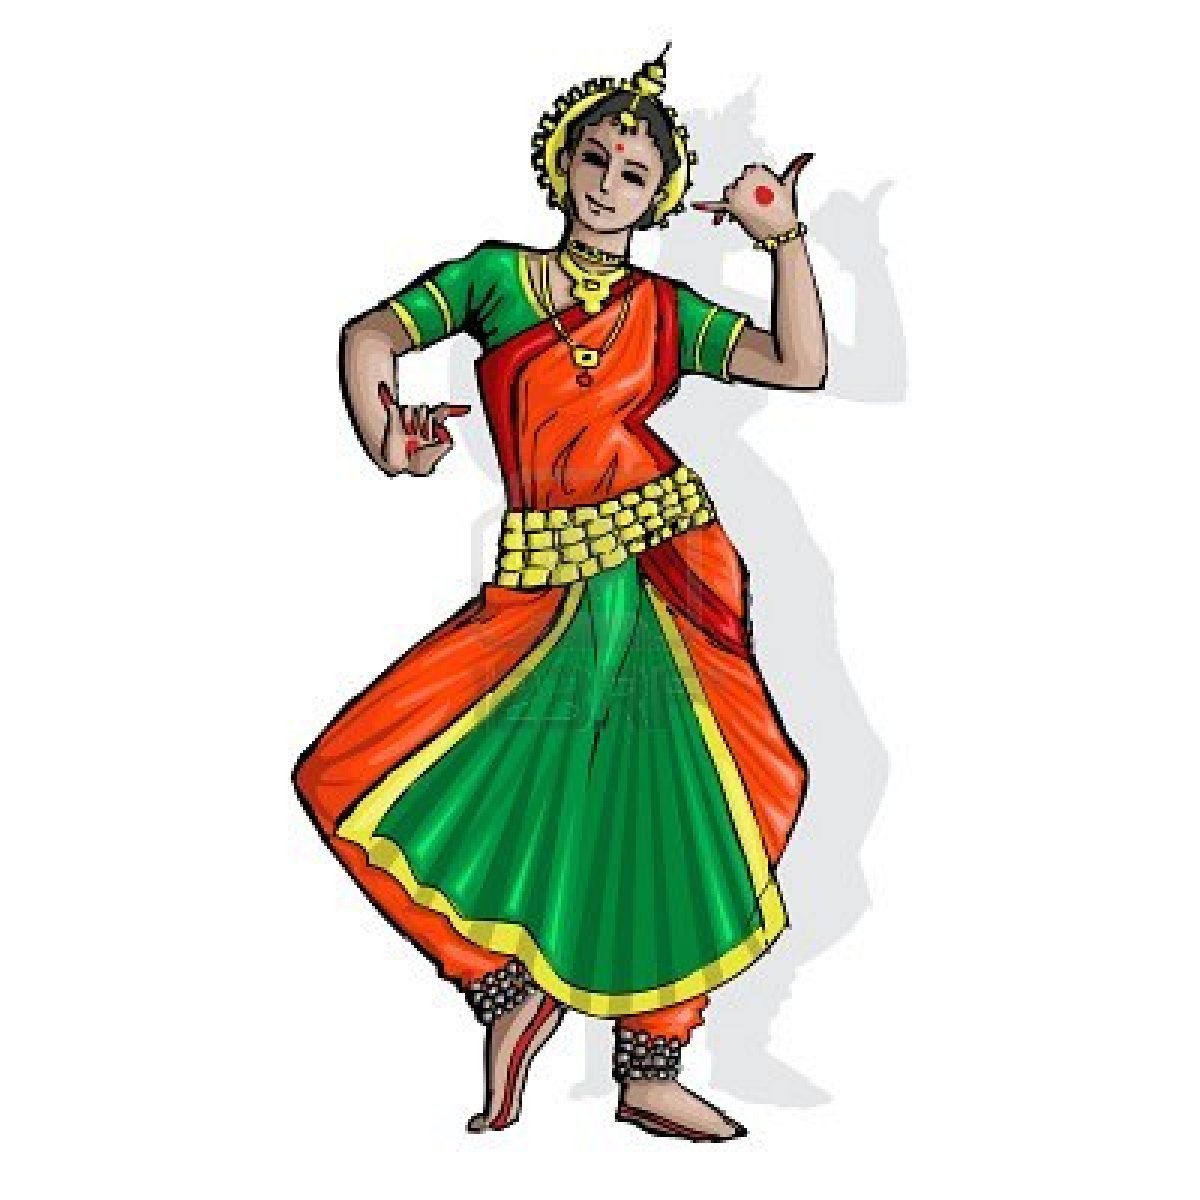 Odissi Indian Classical Dance drawing free image download